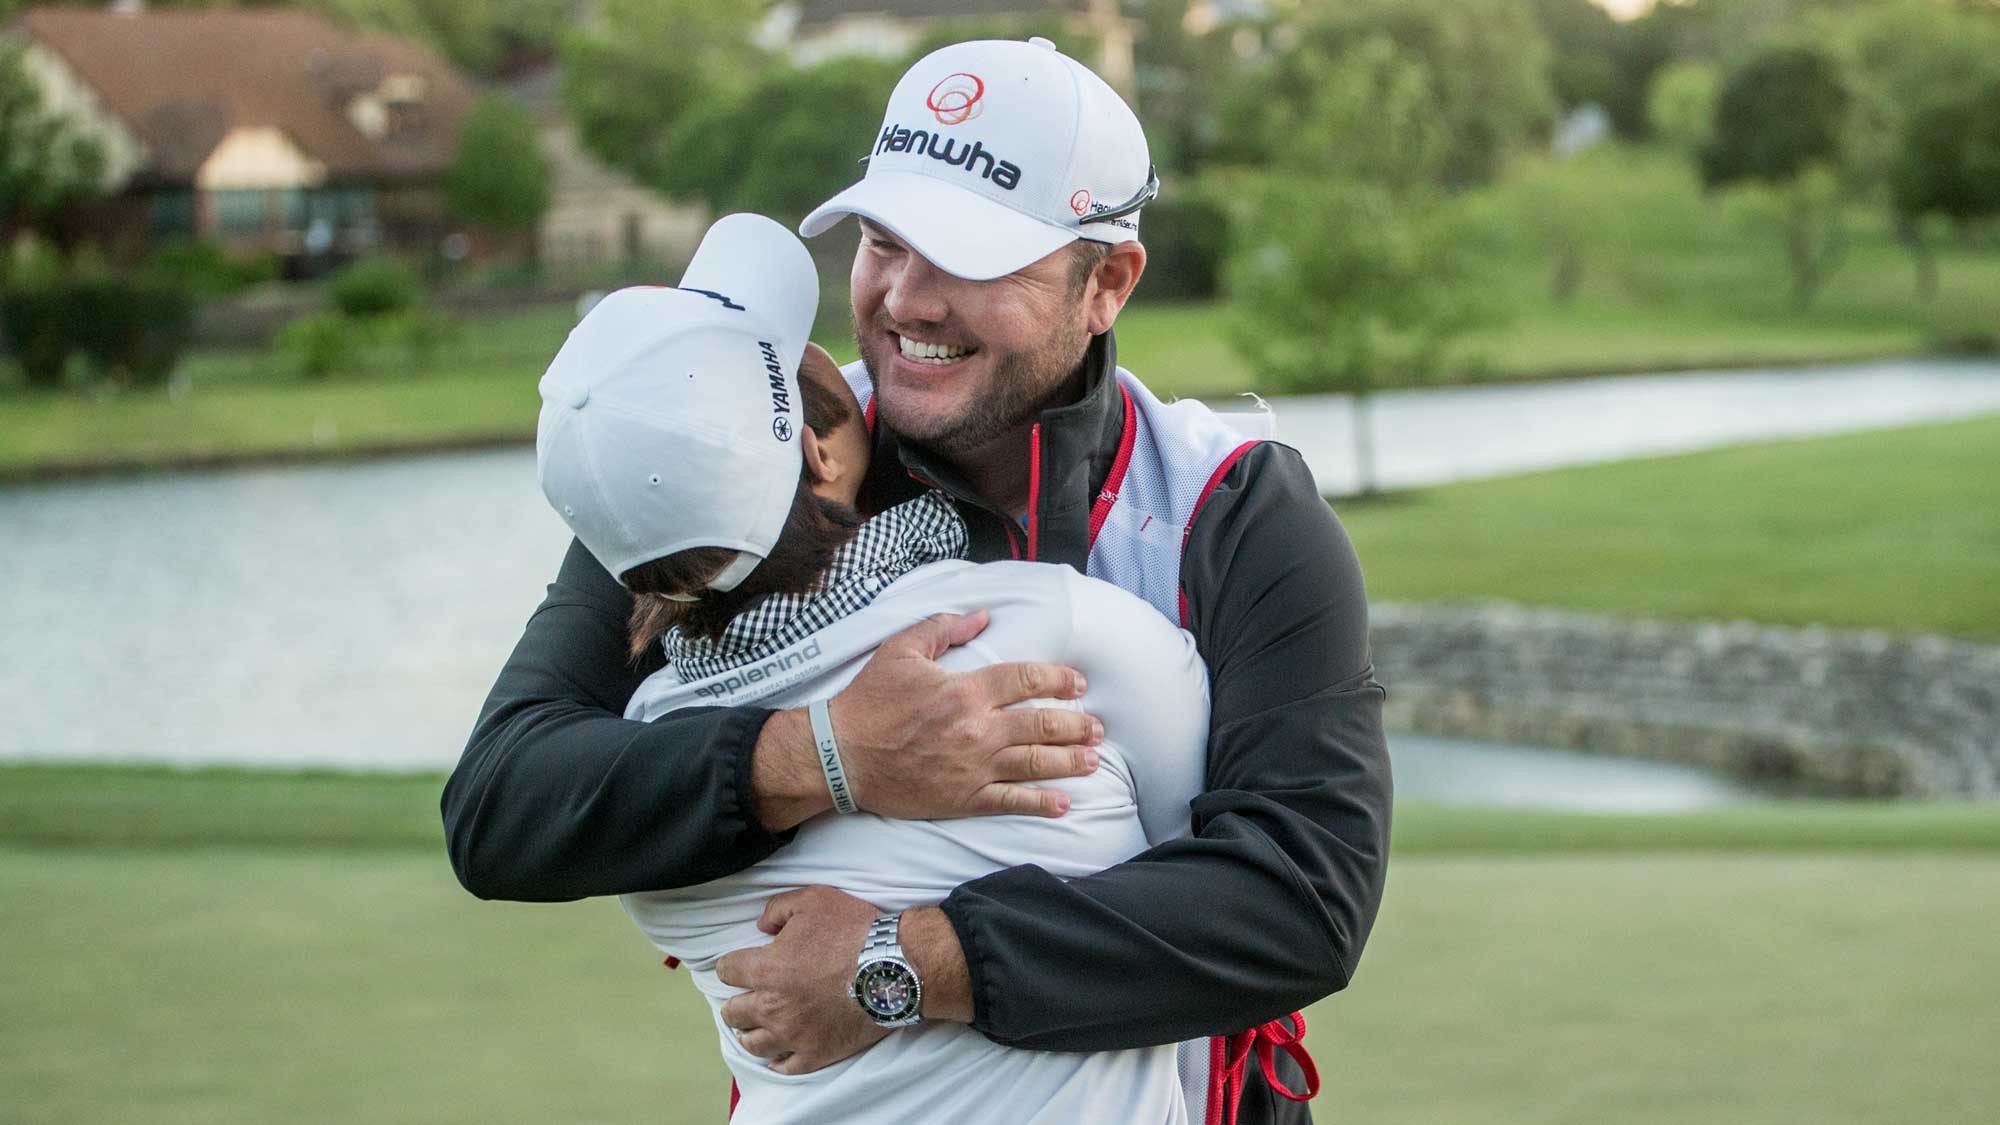 Haru Nomura of Japan is embraced by her caddie Jason McDede, following her victory at the Volunteers of America Texas Shootout 